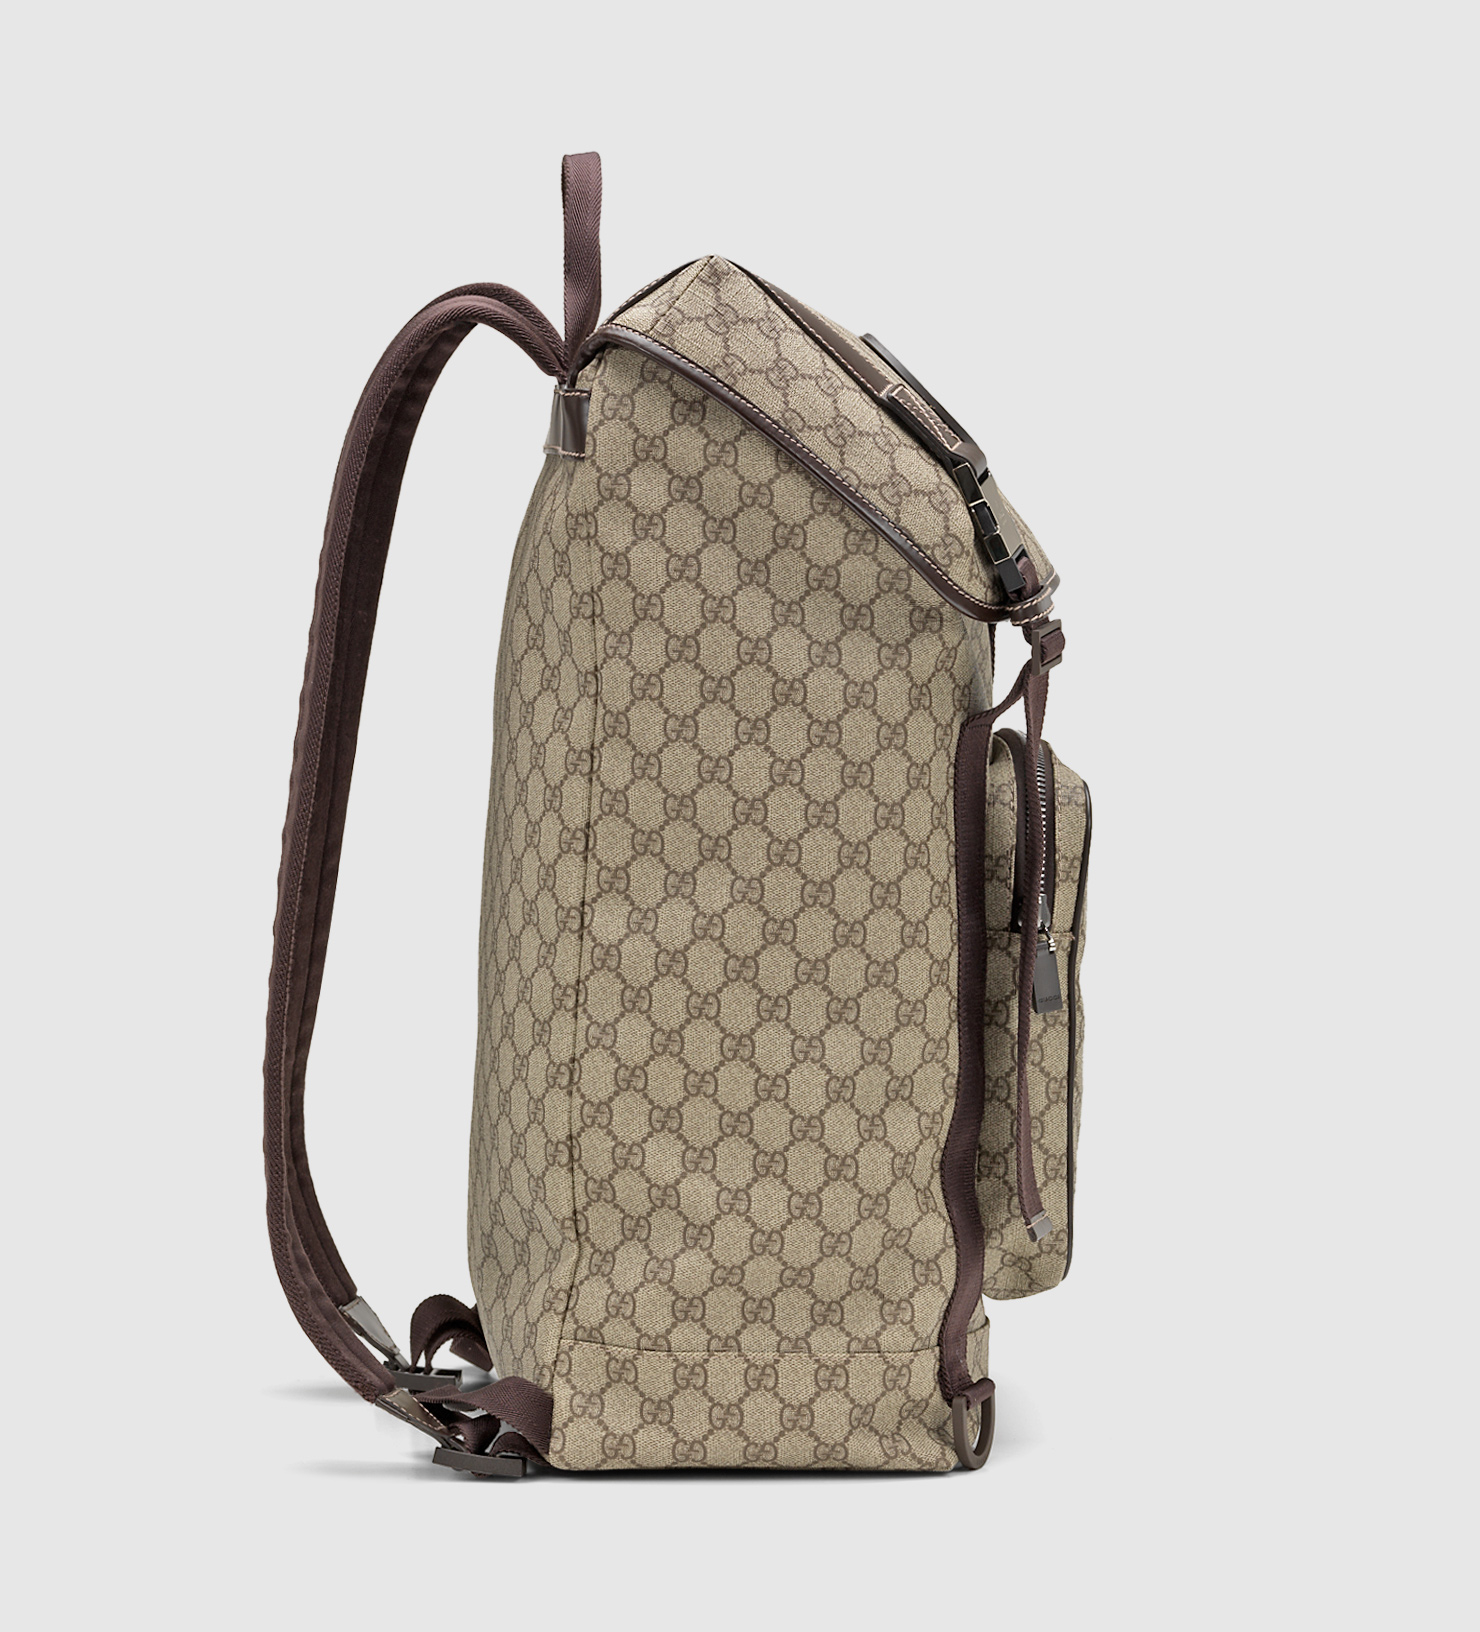 Lyst - Gucci Gg Supreme Canvas Interlocking G Backpack in Natural for Men